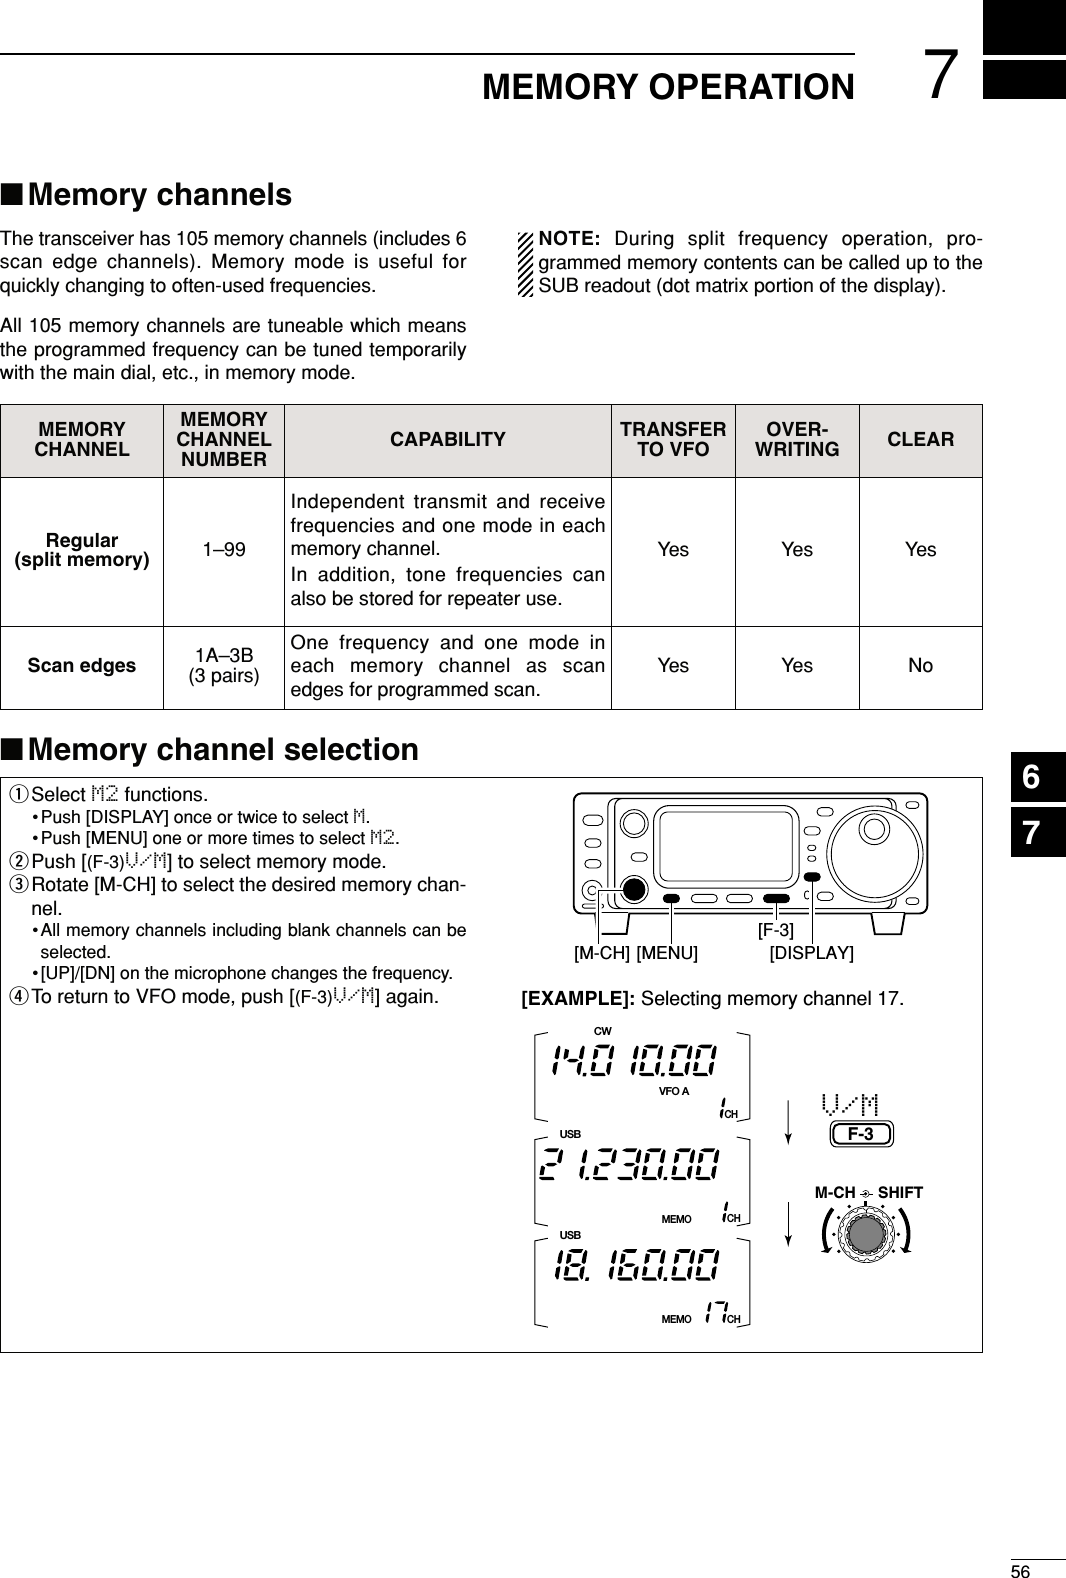 756MEMORY OPERATION■Memory channelsThe transceiver has 105 memory channels (includes 6scan edge channels). Memory mode is useful forquickly changing to often-used frequencies.All 105 memory channels are tuneable which meansthe programmed frequency can be tuned temporarilywith the main dial, etc., in memory mode.qSelect M2 functions.• Push [DISPLAY] once or twice to select M.• Push [MENU] one or more times to select M2.wPush [(F-3)V/M] to select memory mode.eRotate [M-CH] to select the desired memory chan-nel.•All memory channels including blank channels can beselected.• [UP]/[DN] on the microphone changes the frequency.rTo return to VFO mode, push [(F-3)V/M] again.CWCHVFO A[EXAMPLE]: Selecting memory channel 17.V/MF-3USBCHMEMOSPLITCHMEMOUSBM-CH SHIFT[DISPLAY][MENU][M-CH][F-3]■Memory channel selectionNOTE:During split frequency operation, pro-grammed memory contents can be called up to theSUB readout (dot matrix portion of the display).MEMORYCHANNELMEMORYCHANNELNUMBERCAPABILITY TRANSFERTO VFOOVER-WRITING CLEARRegular(split memory) 1–99Independent transmit and receivefrequencies and one mode in eachmemory channel.In addition, tone frequencies canalso be stored for repeater use.Yes Yes YesScan edges 1A–3B(3 pairs)One frequency and one mode ineach memory channel as scanedges for programmed scan.Yes Yes No67